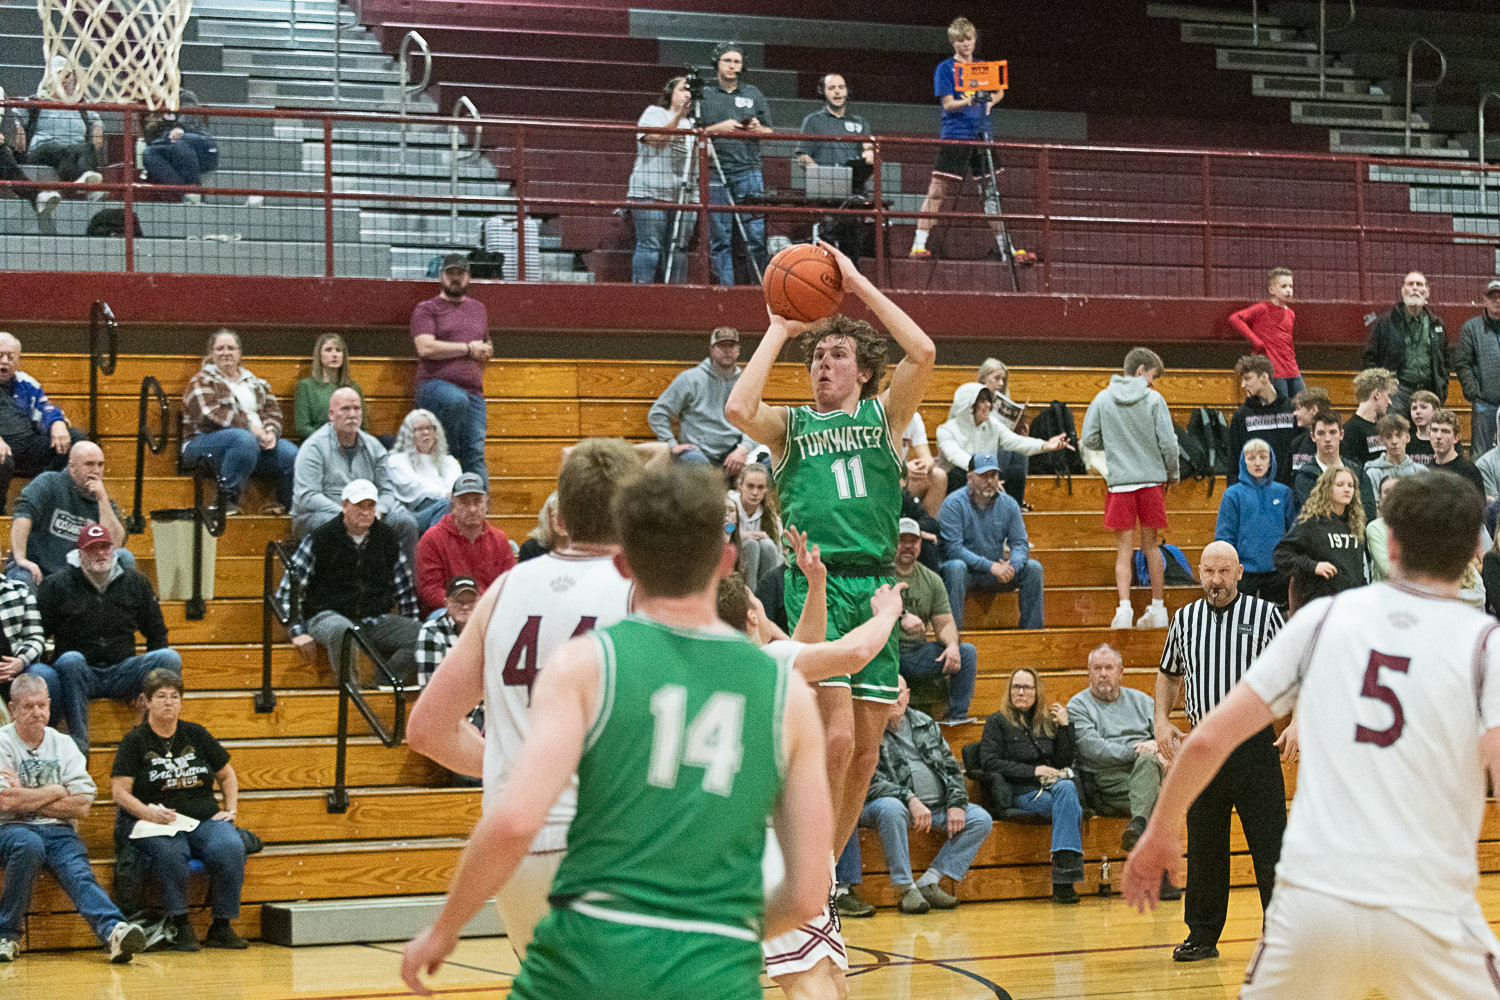 Tumwater's Luke Brewer hits a jumper during the T-Birds' 71-58 win over W.F. West on Jan. 11 in Chehalis.